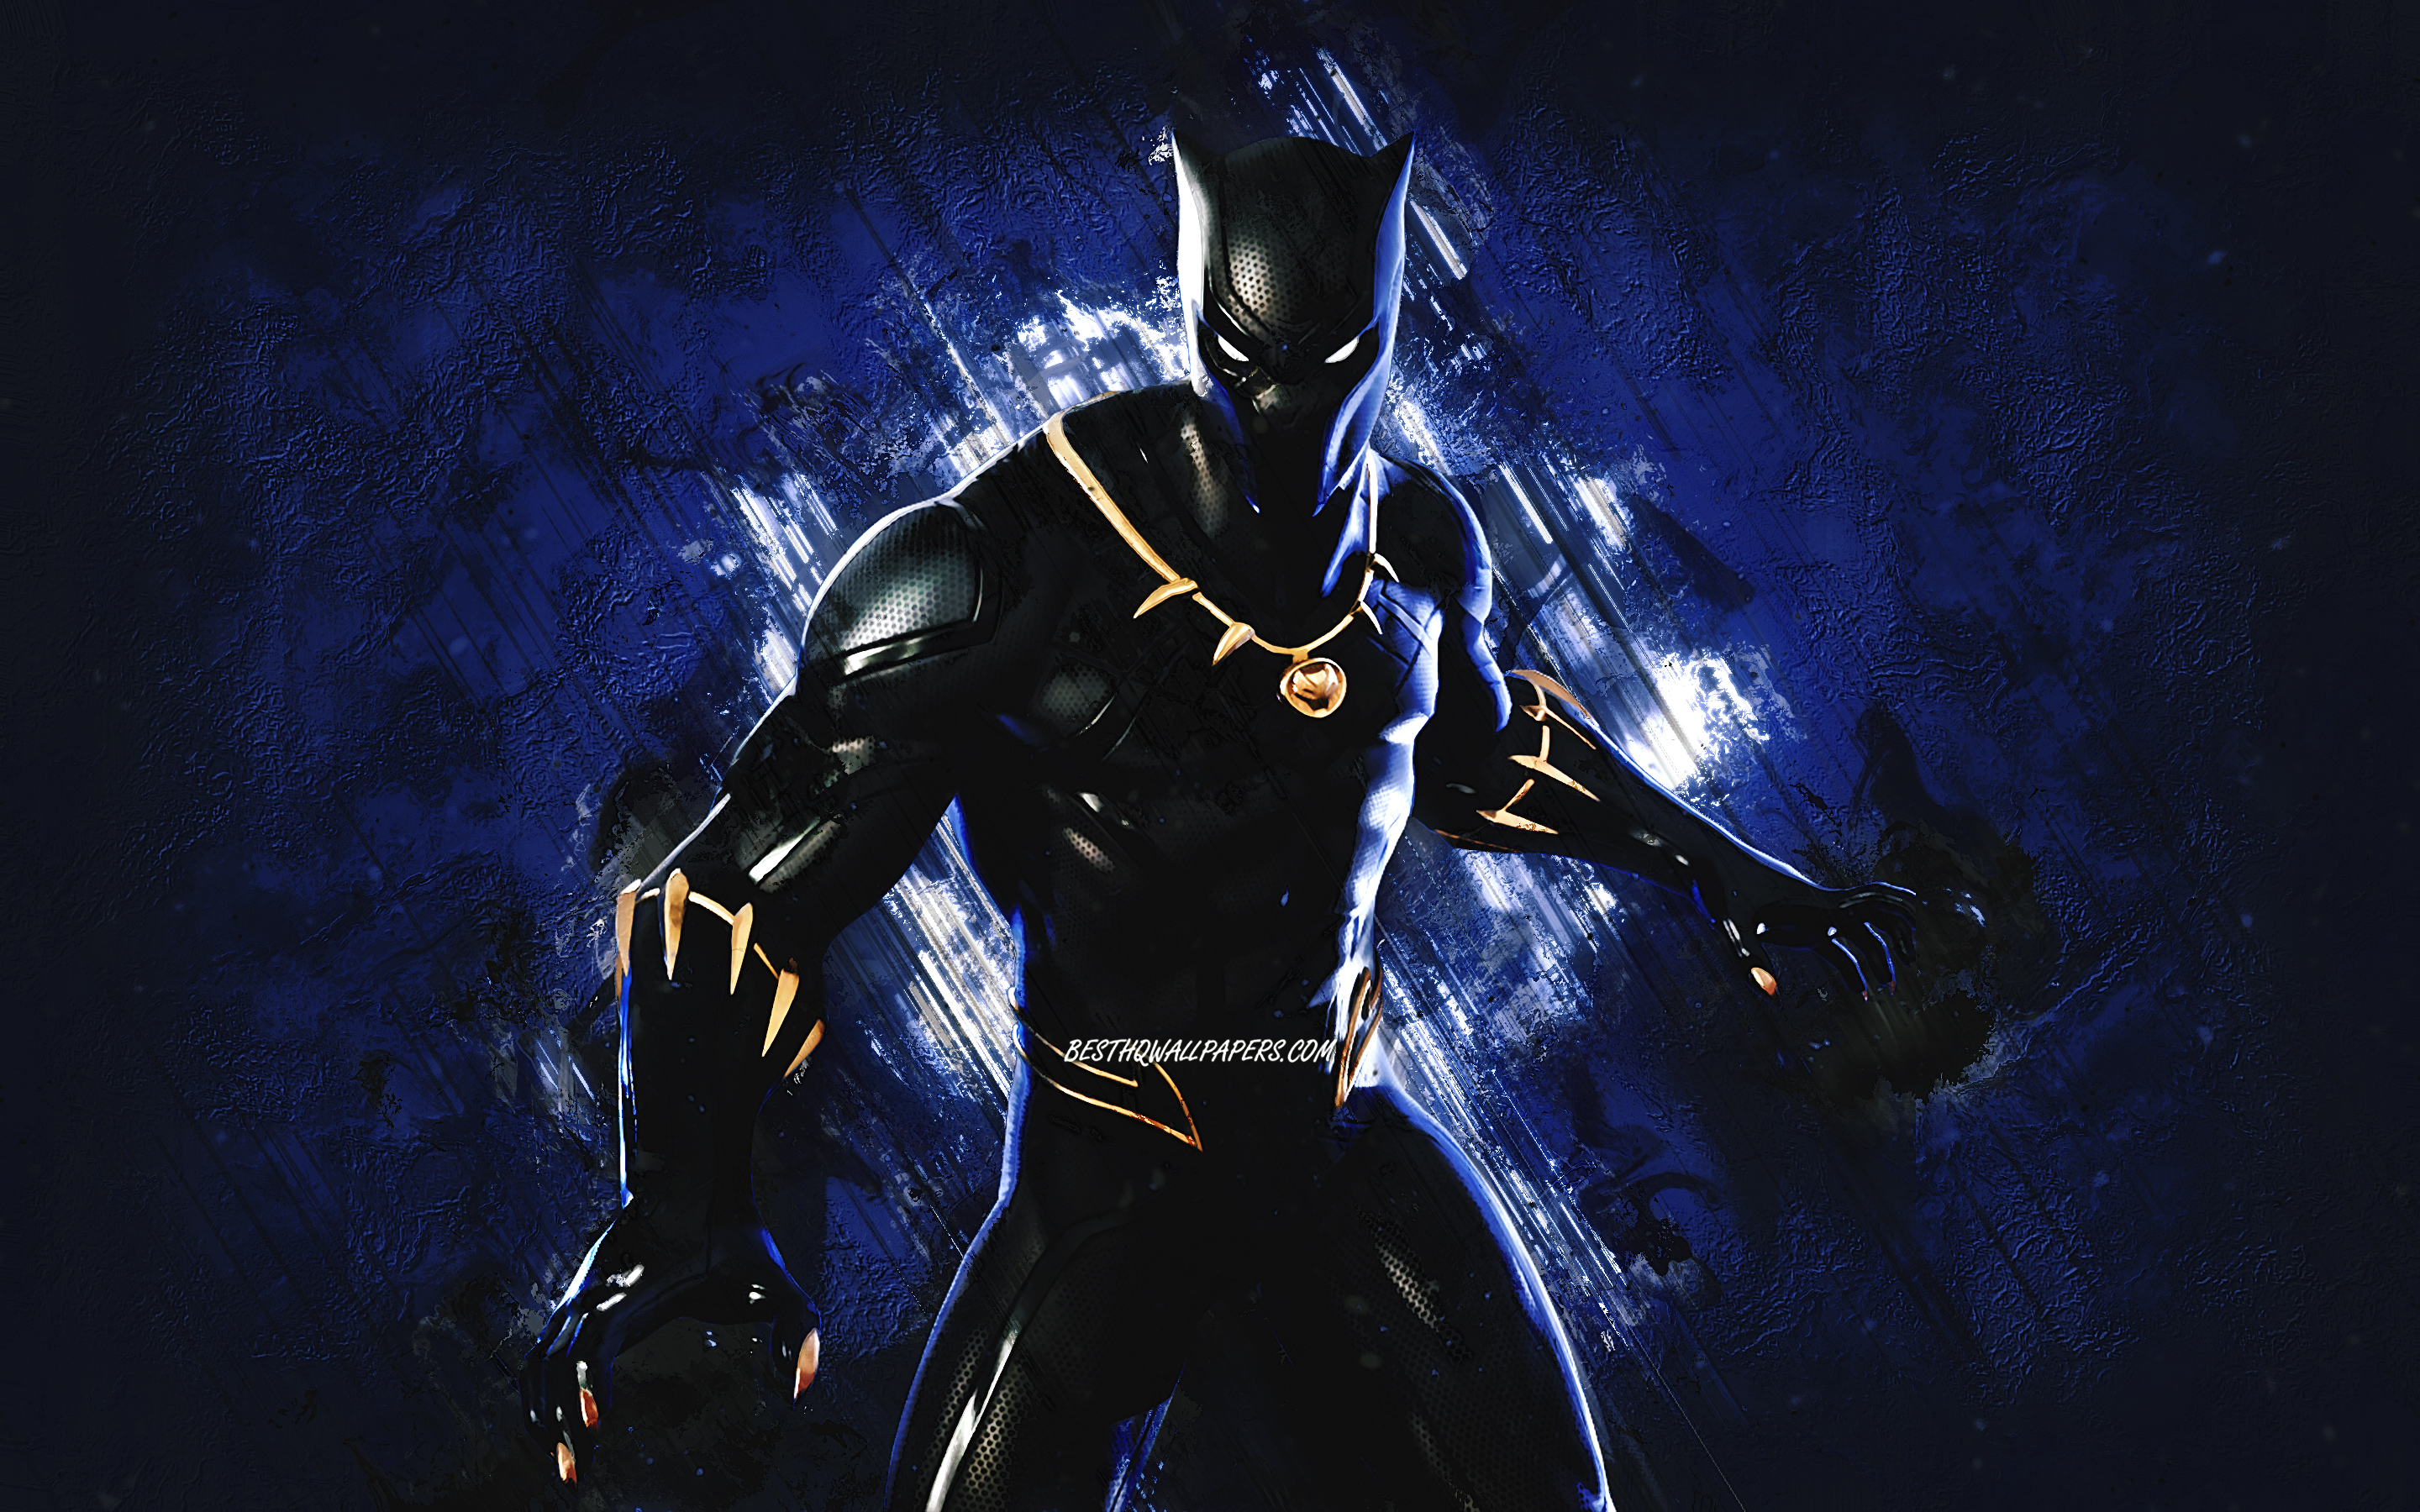 Download wallpapers Fortnite Black Panther Skin, Fortnite, main characters,  blue stone background, Black Panther, Fortnite skins, Black Panther Skin, Black  Panther Fortnite, Fortnite characters for desktop with resolution  2880x1800. High Quality HD